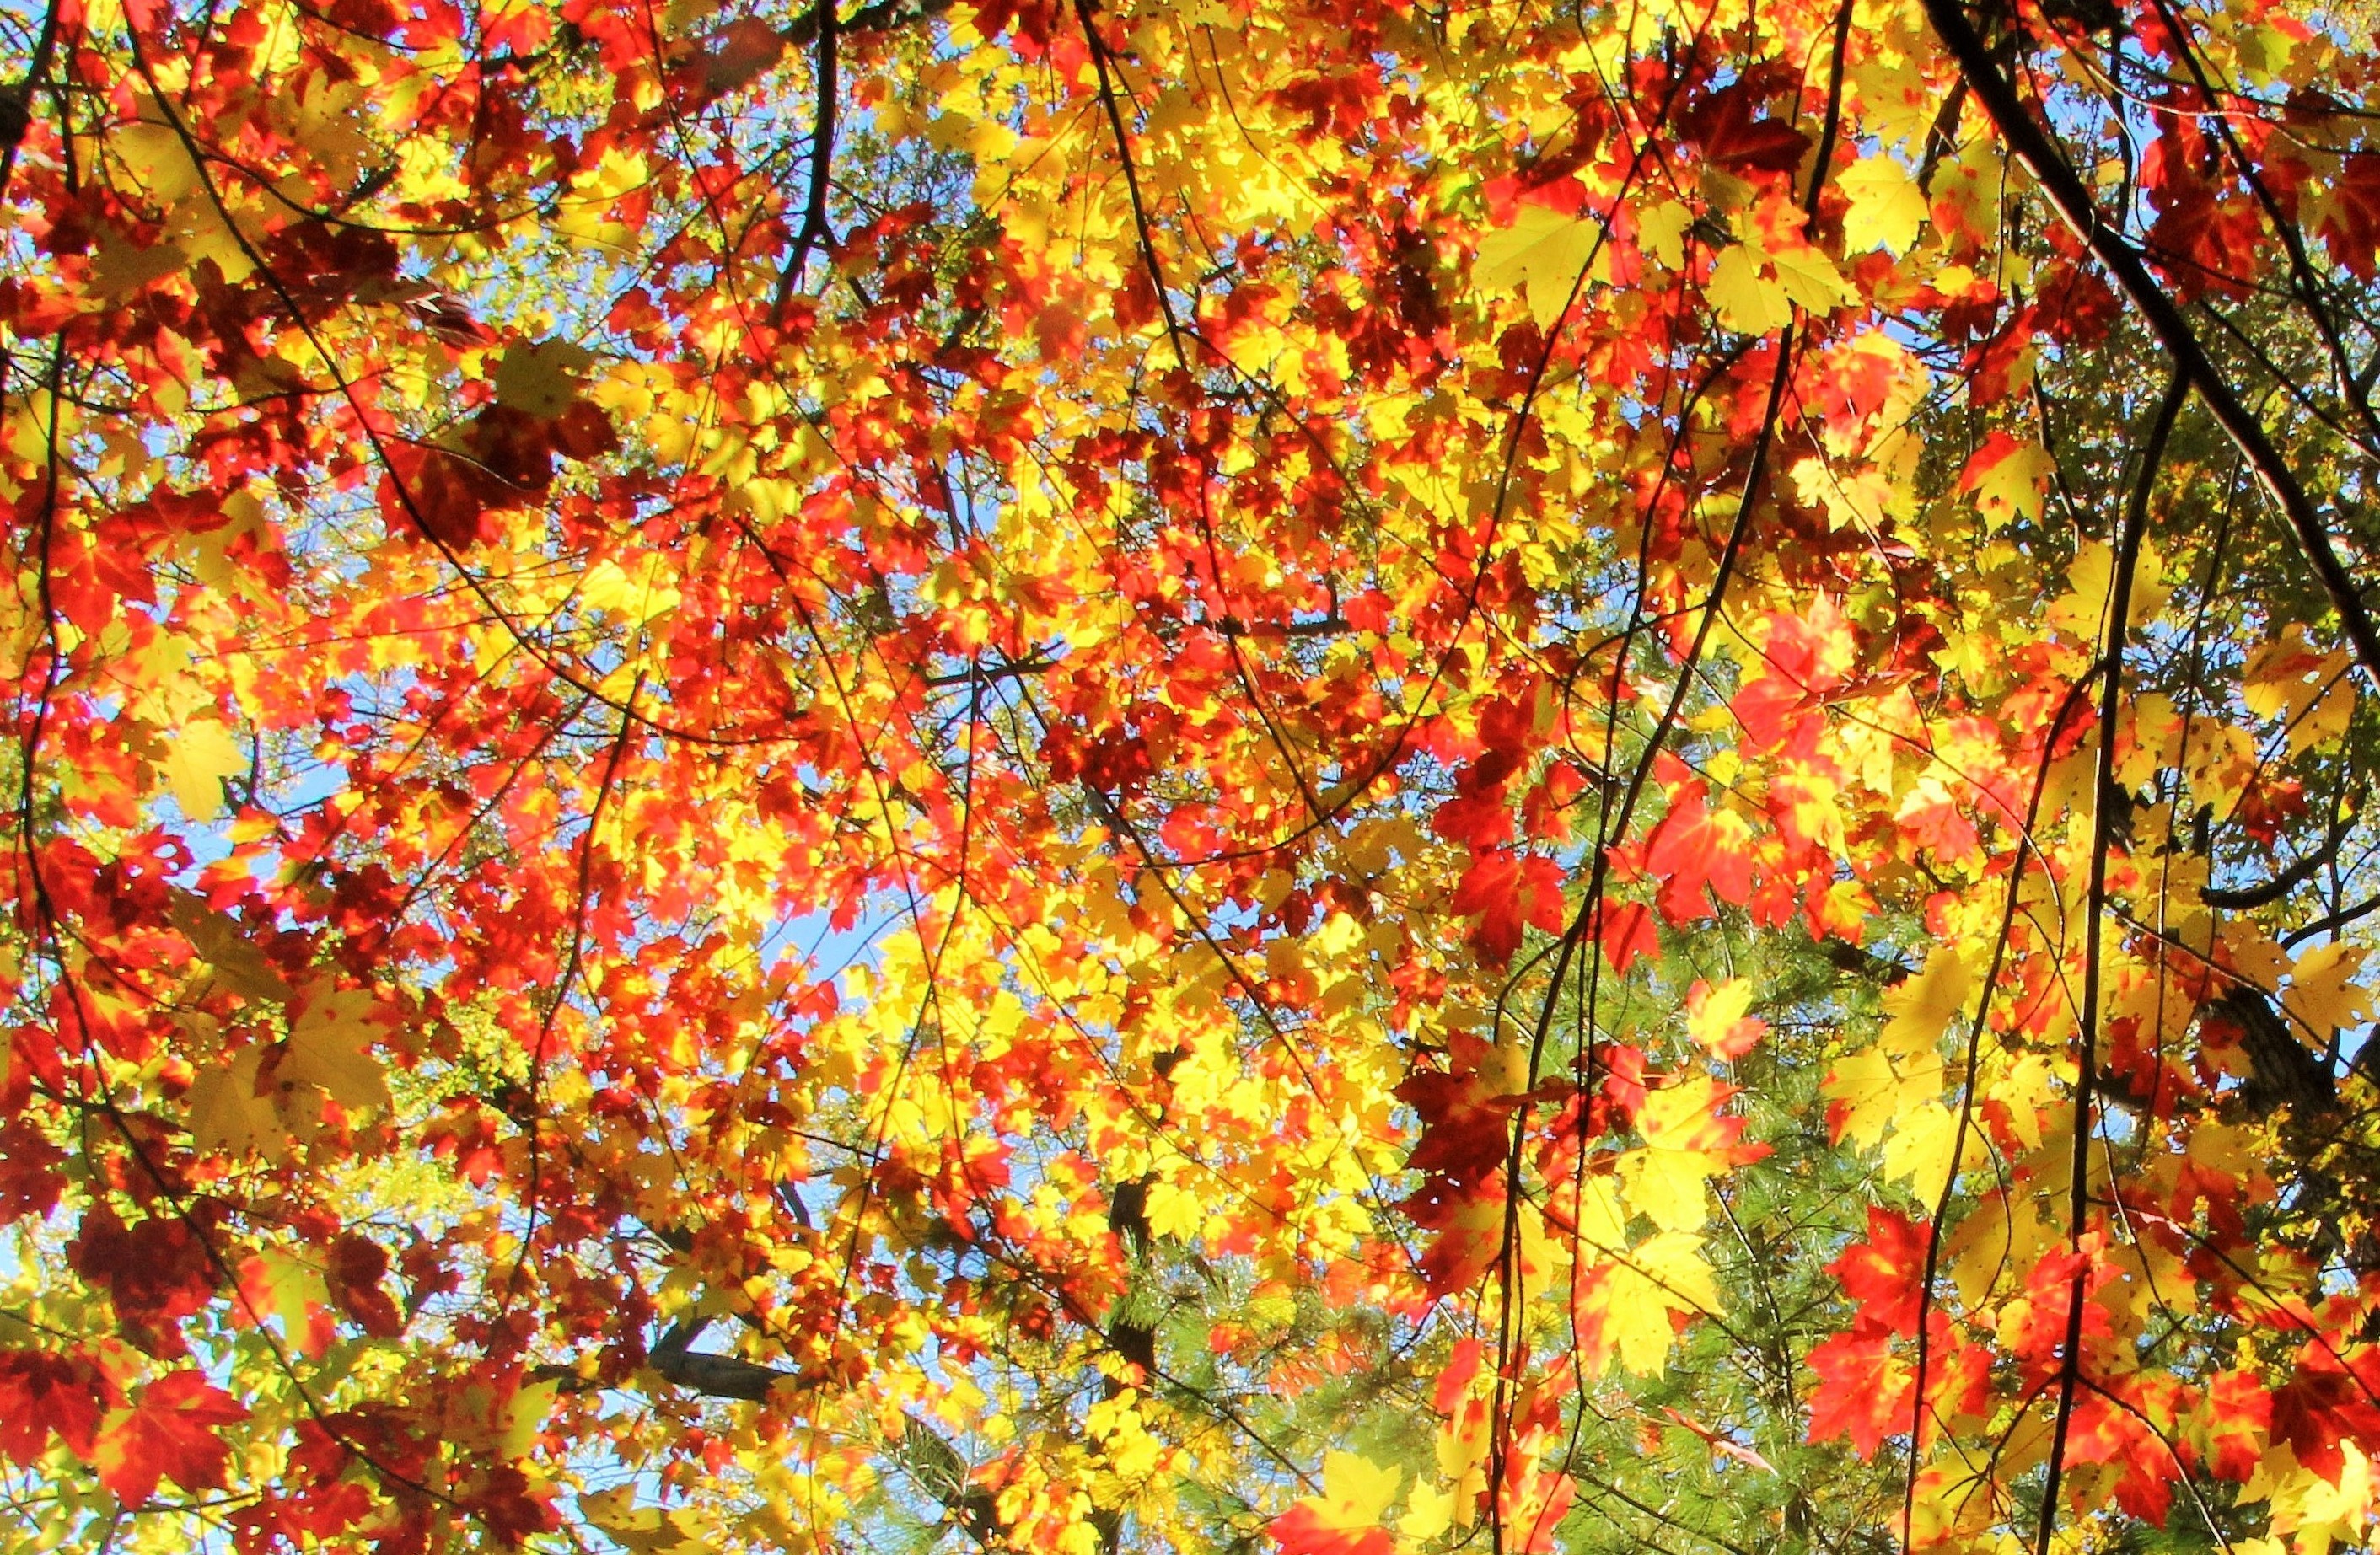 A blaze of colour: autumn comes to Canada - The Travelling Boomer